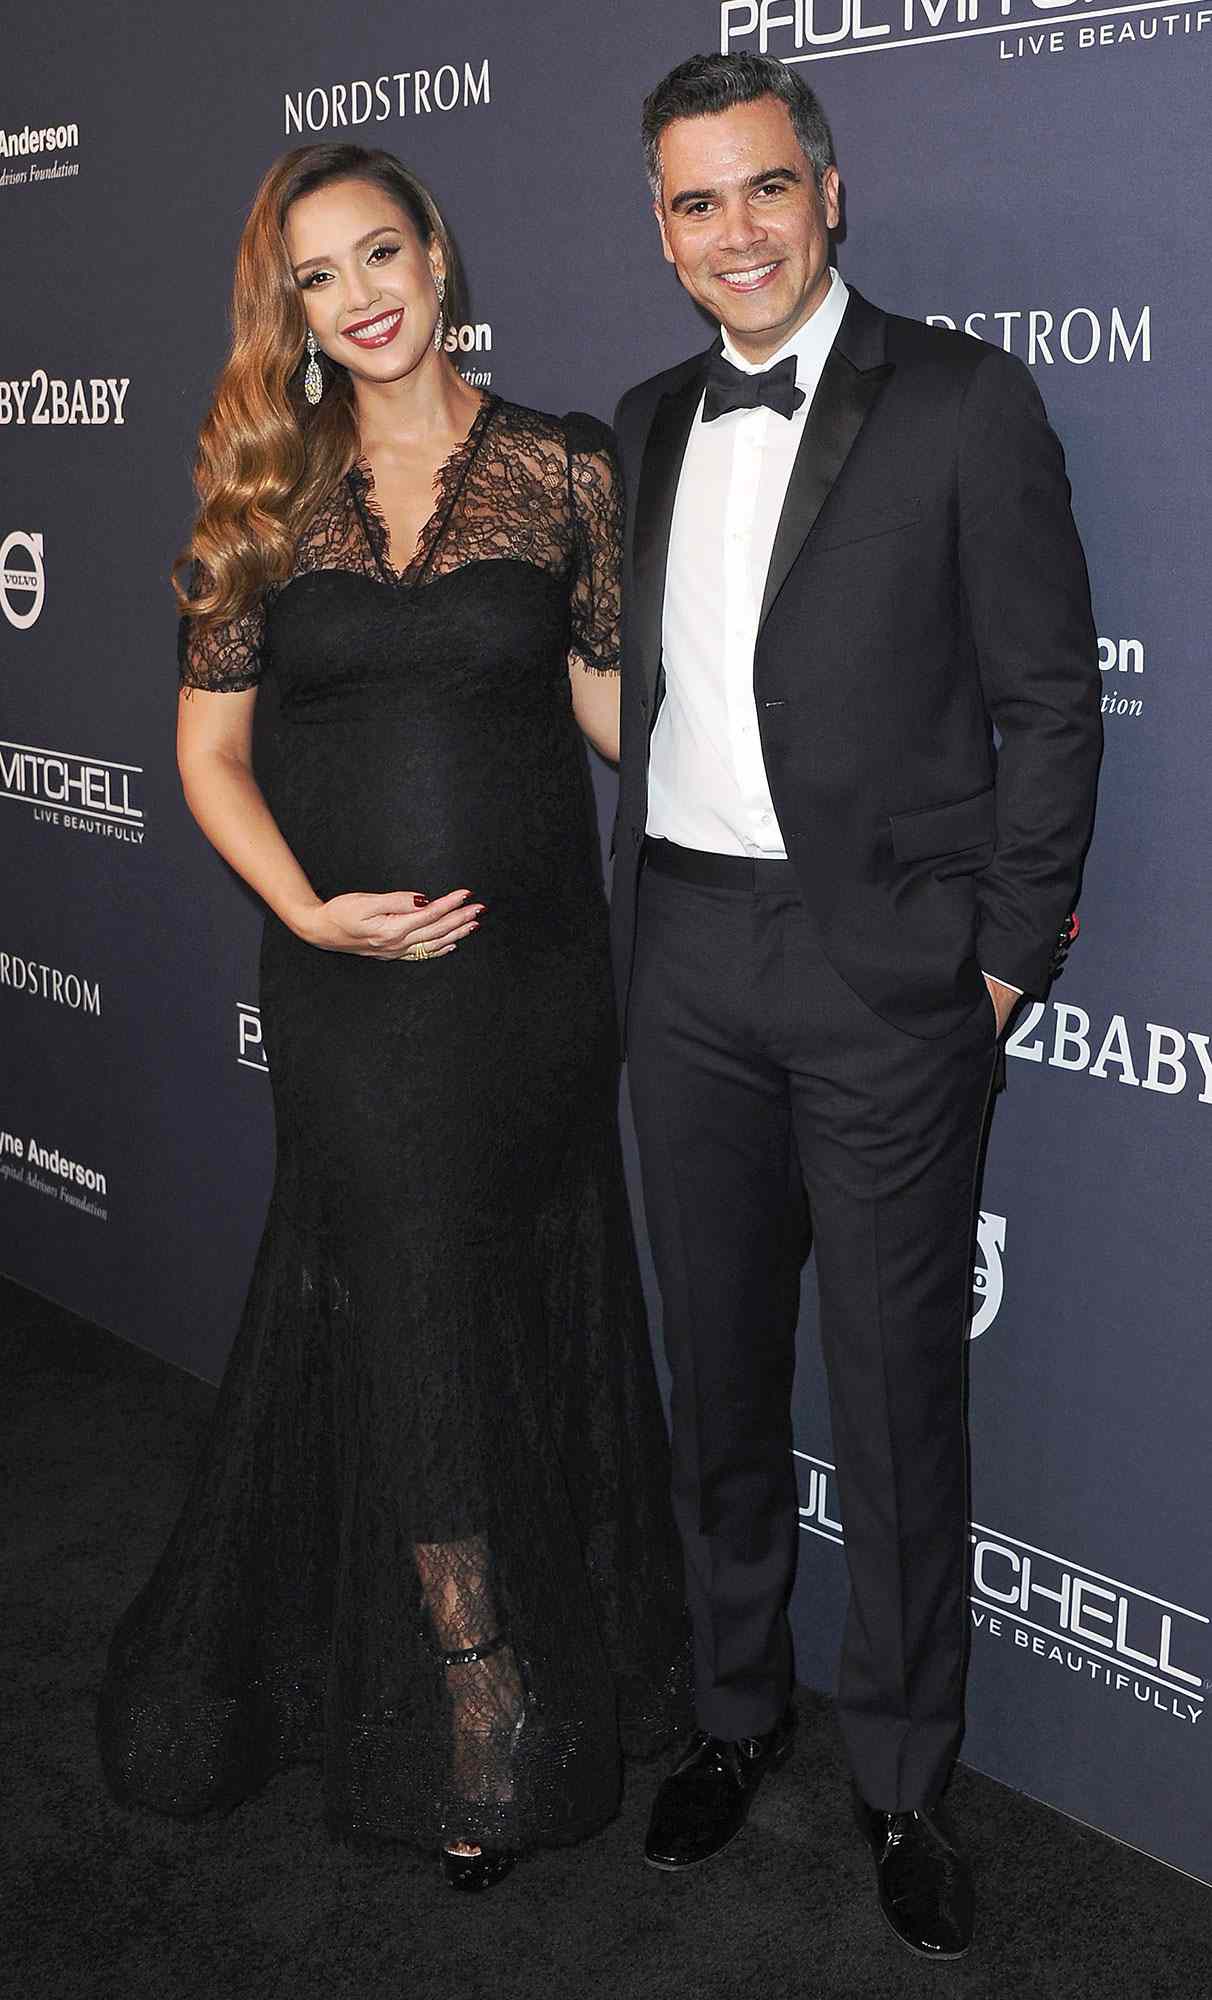 Jessica Alba And Cash Warren Welcome Son Hayes Alba People Com Cash and i feel so blessed. https people com parents jessica alba cash warren welcome third child son hayes